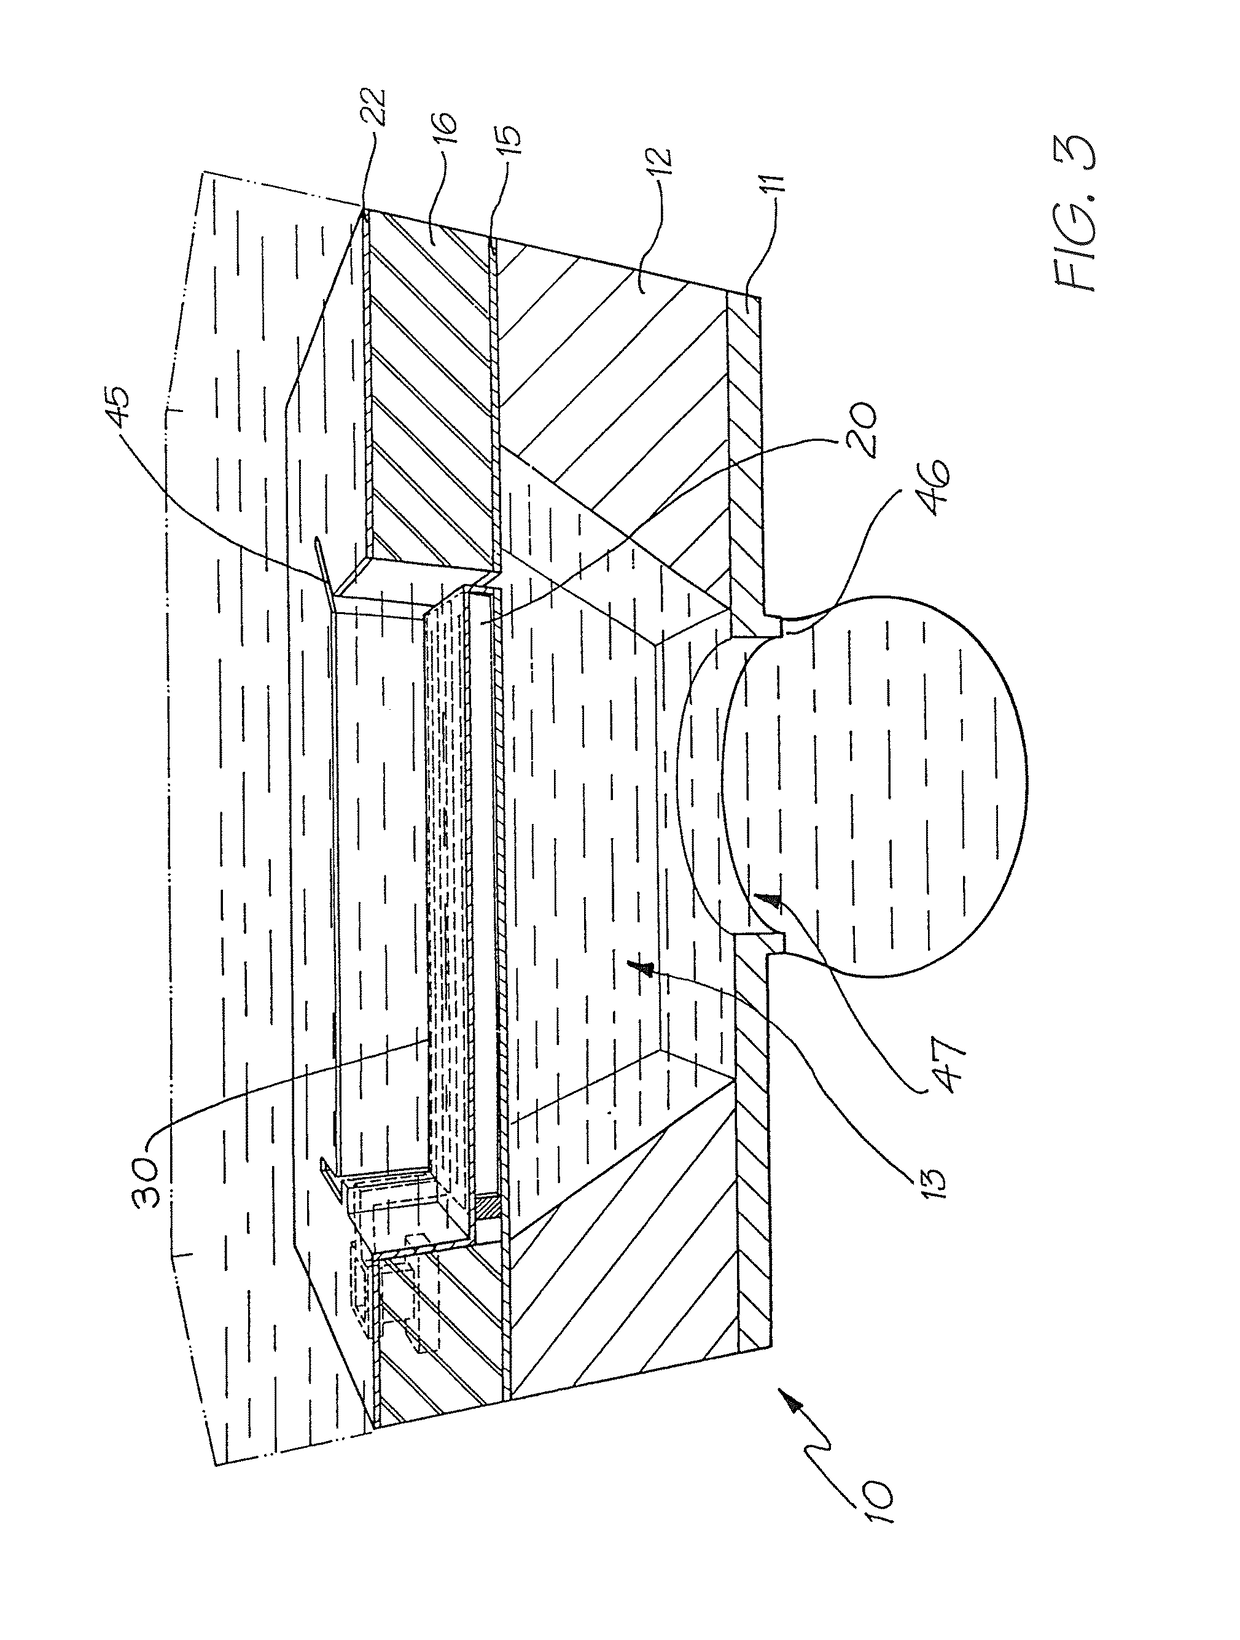 Method of forming printhead by removing sacrificial material through nozzle apertures